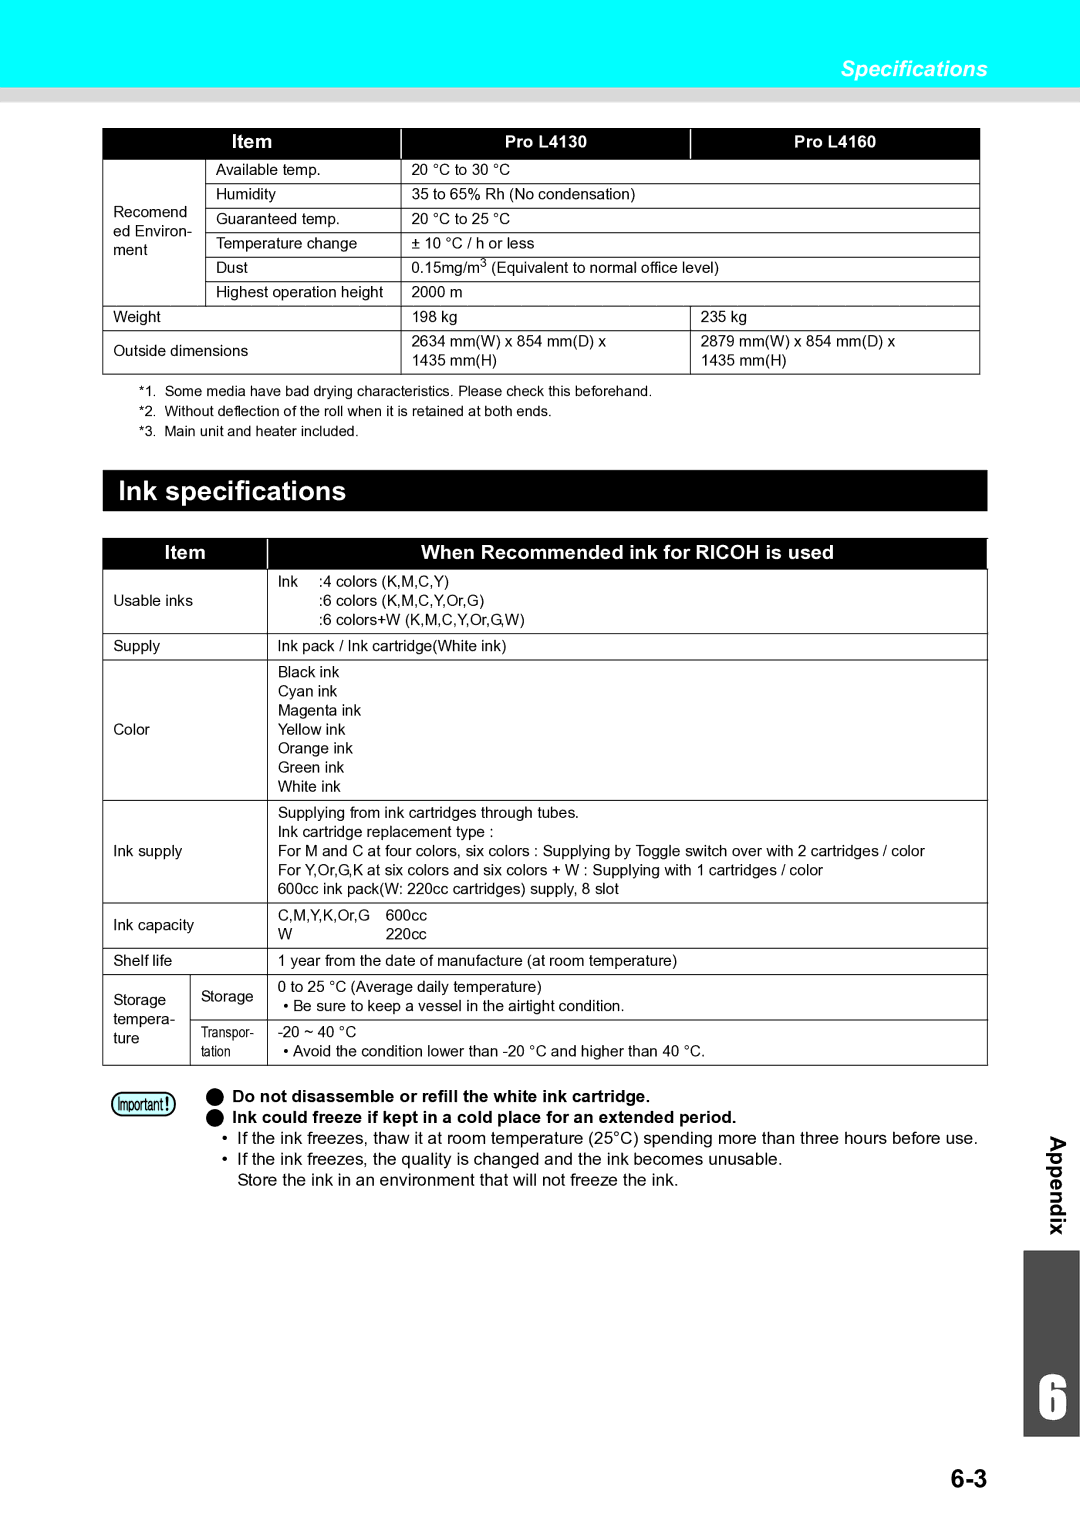 Ricoh L4160, L4130 operation manual Ink specifications, Specifications 